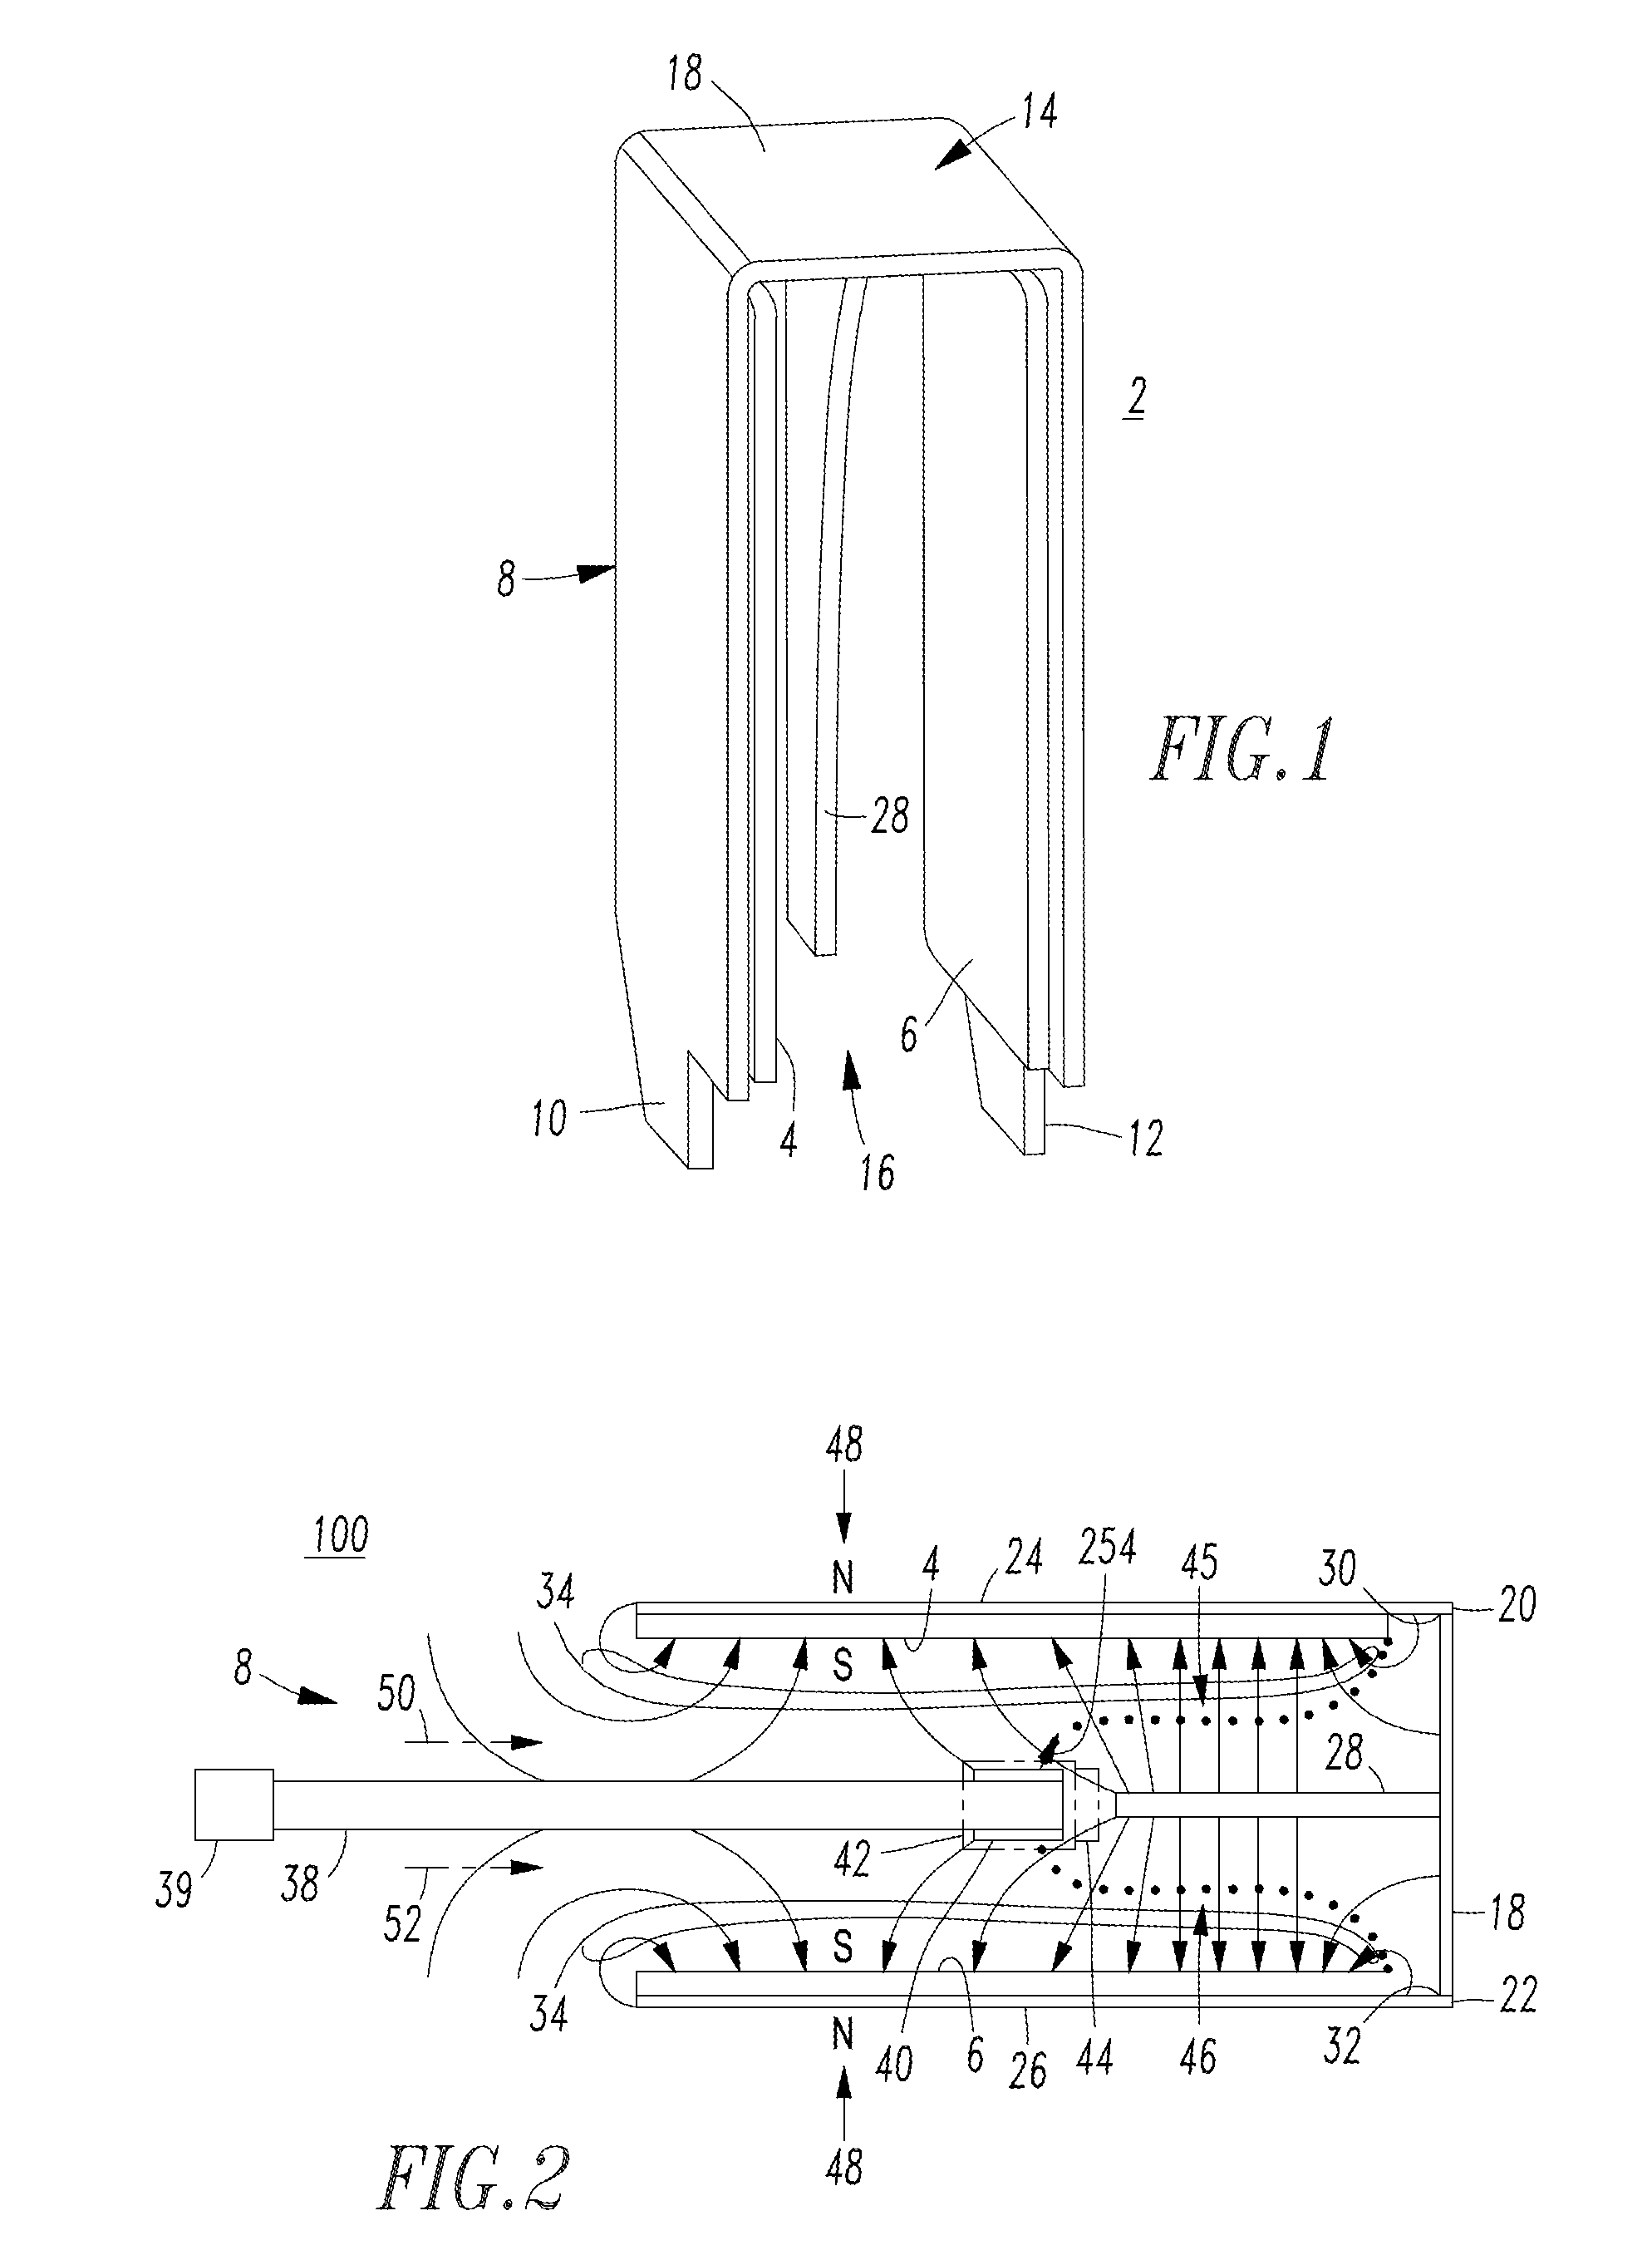 Single direct current arc chute, and bi-directional direct current electrical switching apparatus employing the same